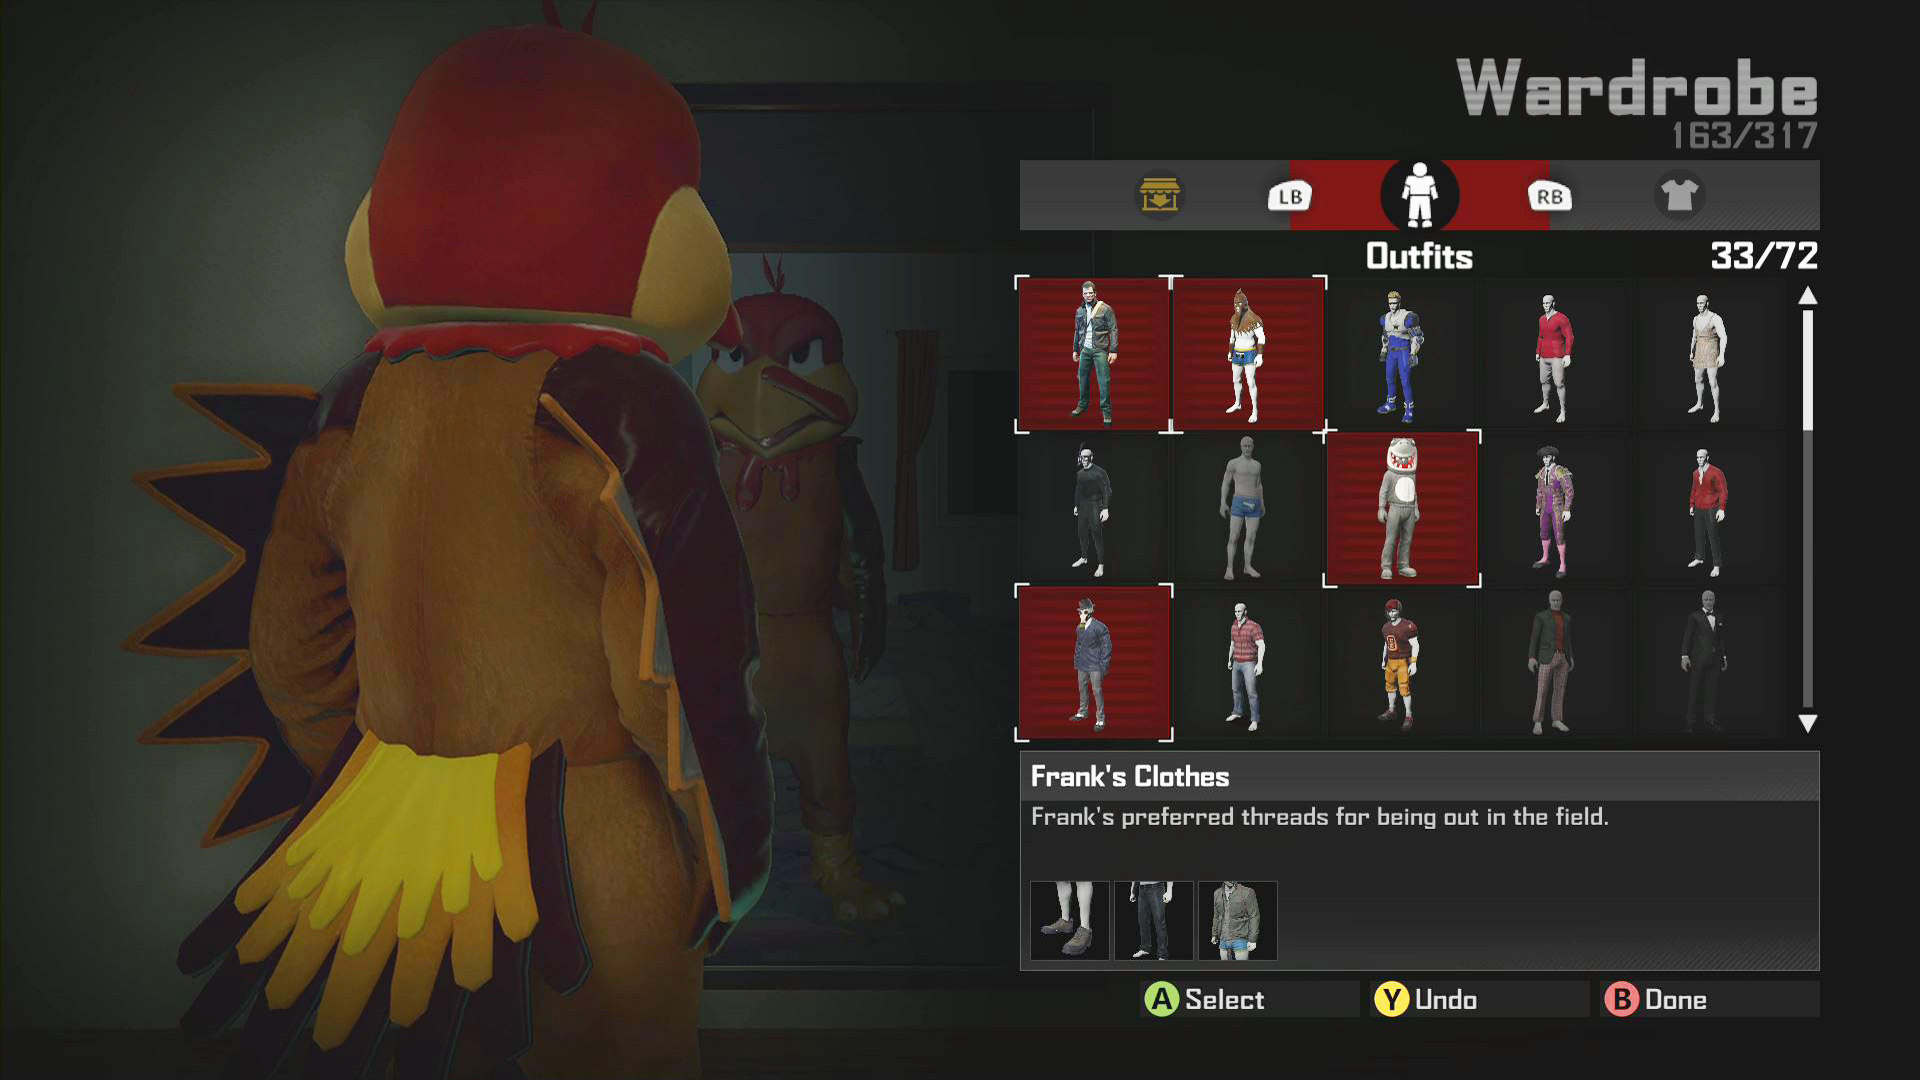 Dead Rising 4 Outfits and Clothing collection